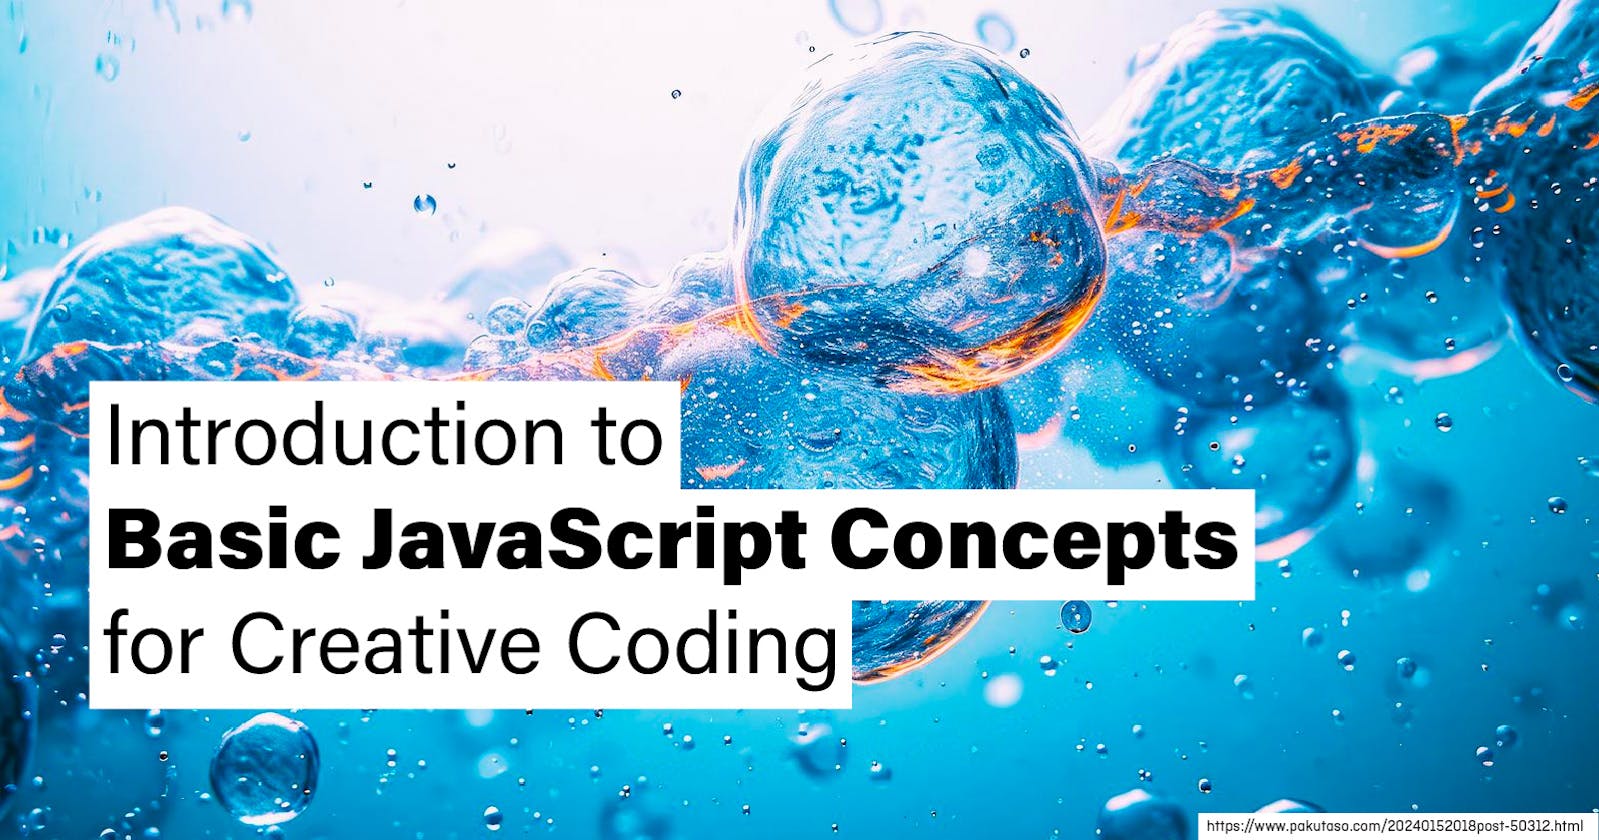 Introduction to Basic JavaScript Concepts for Creative Coding